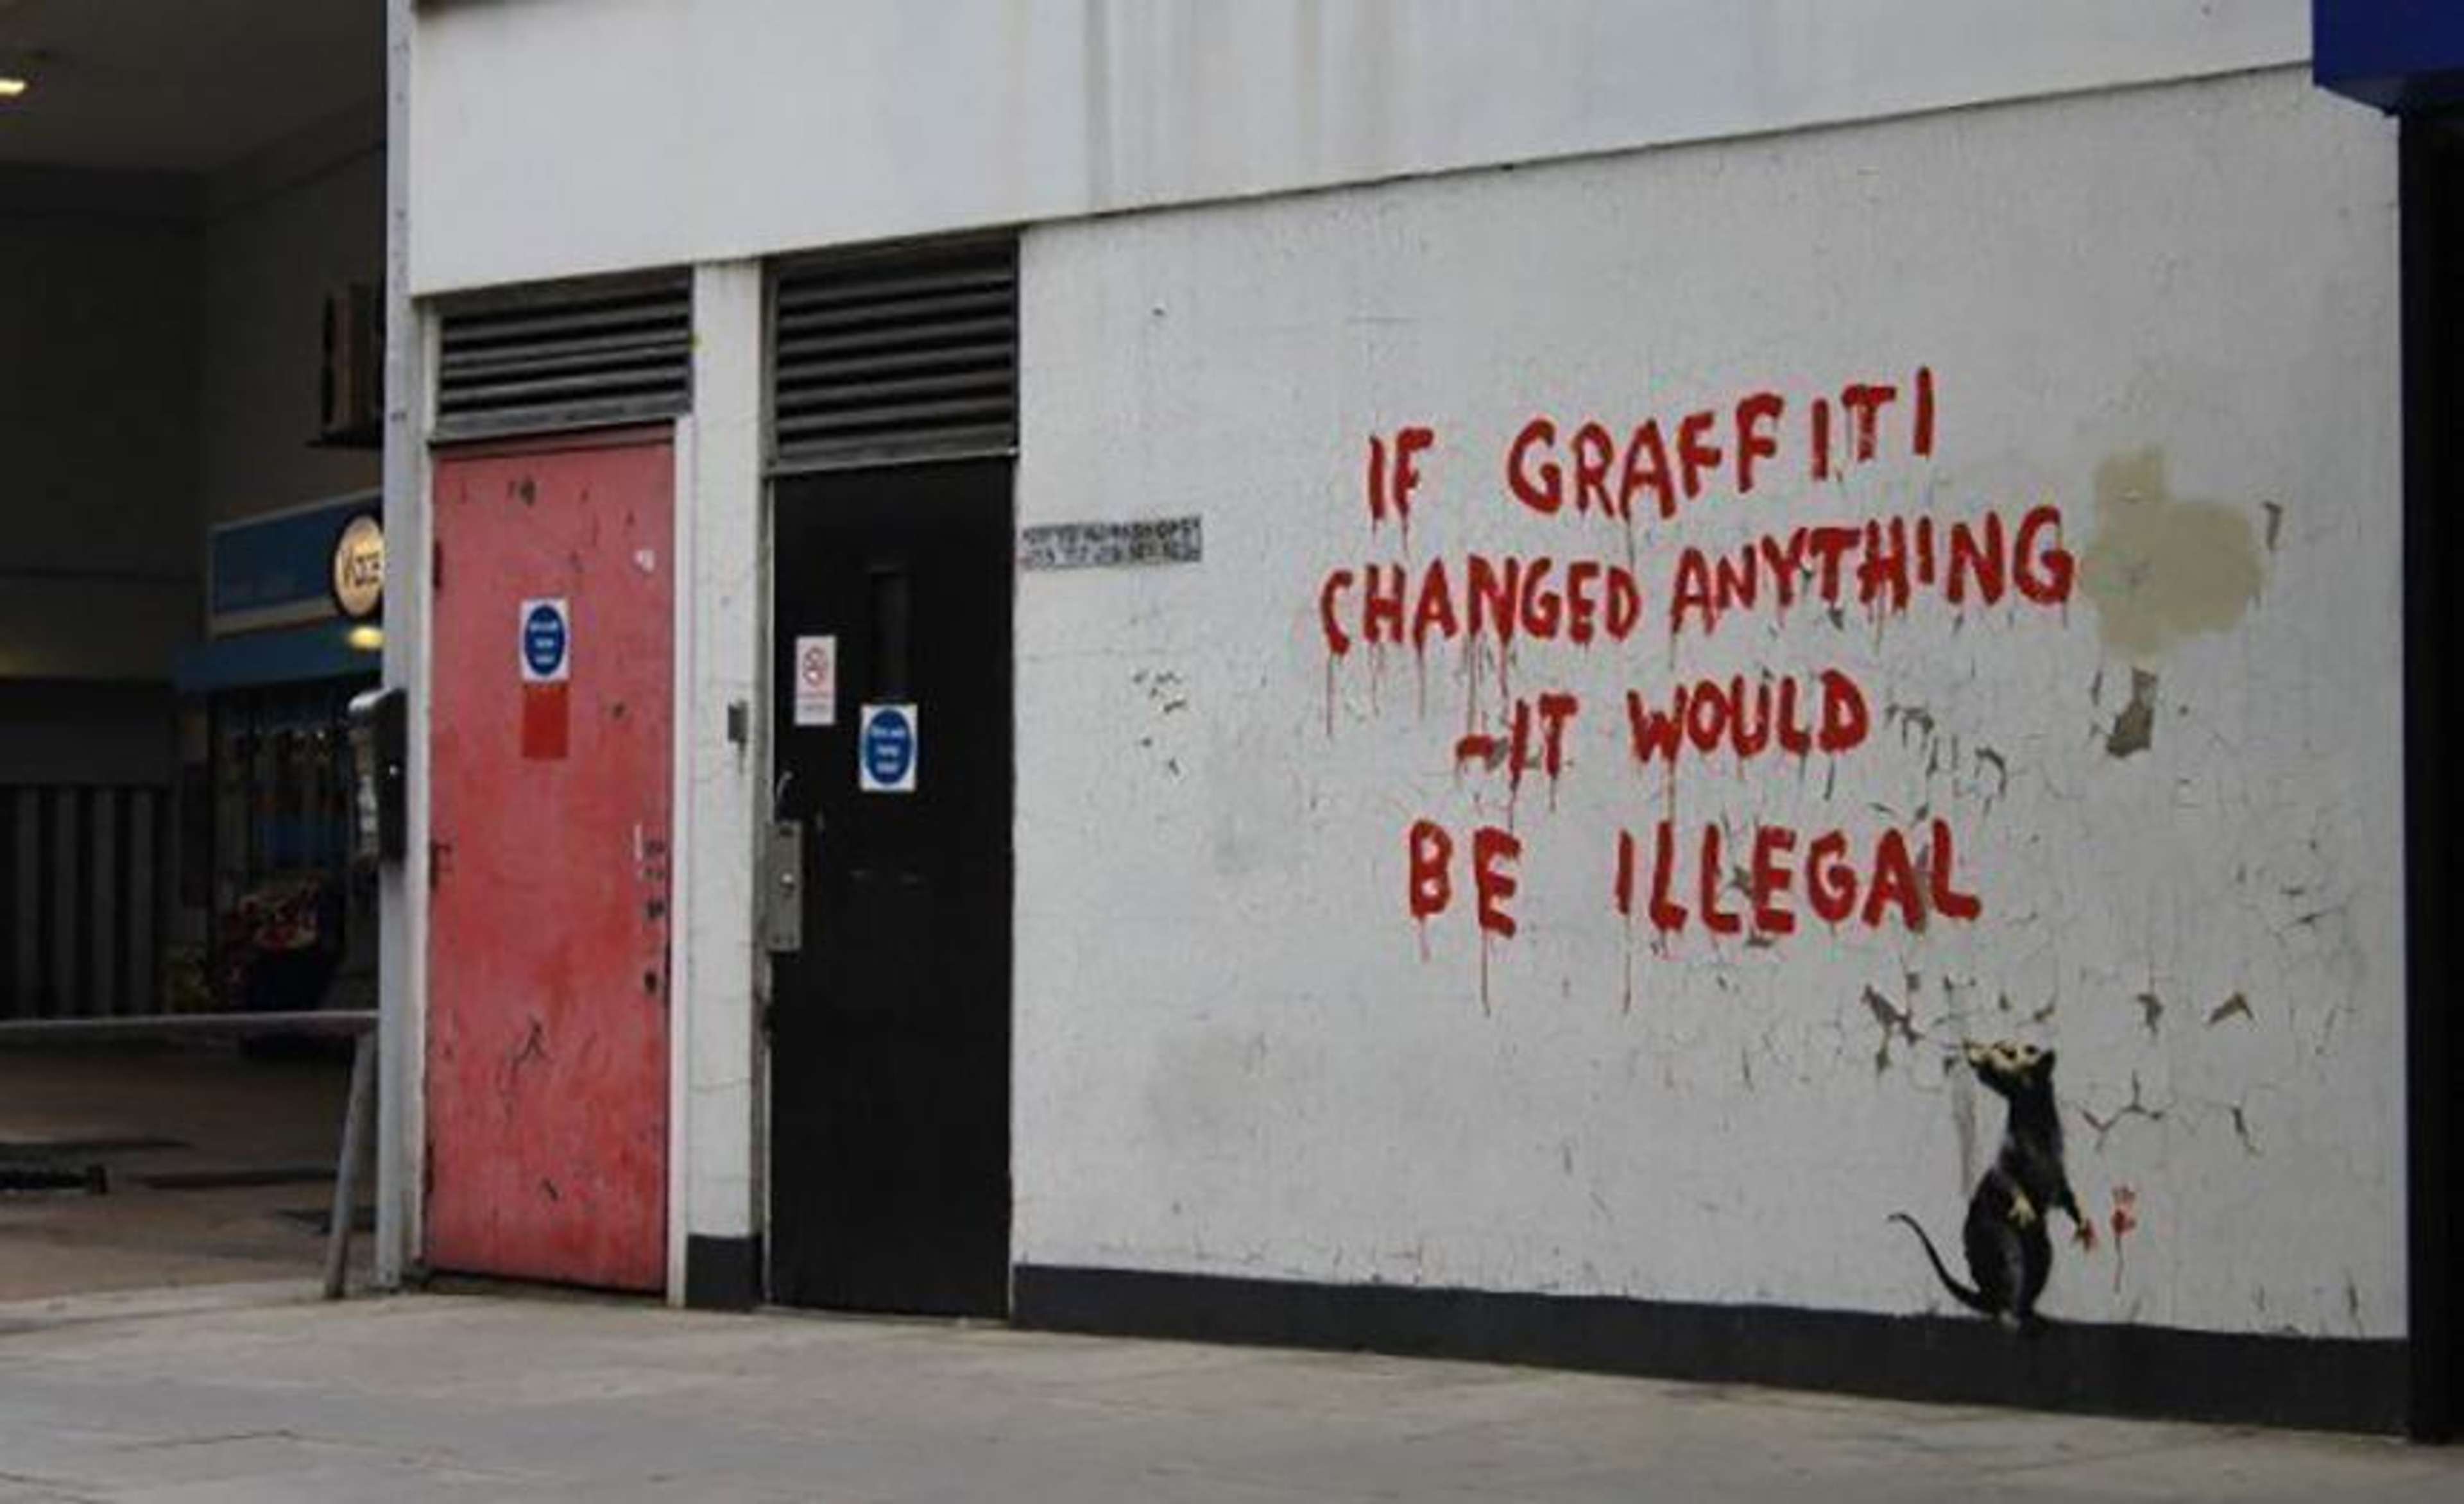 If Graffiti Changed Anything It Would Be Illegal by Banksy